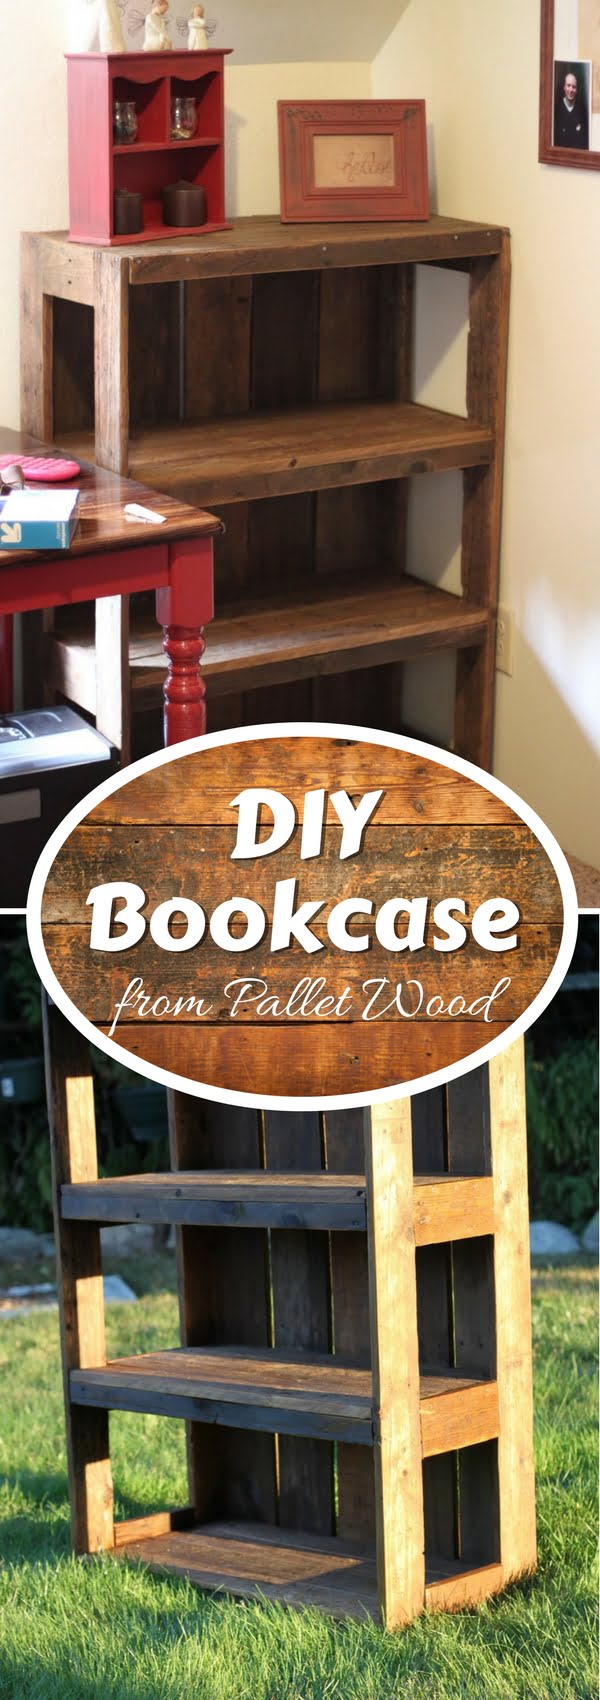 bookcase from pallet wood